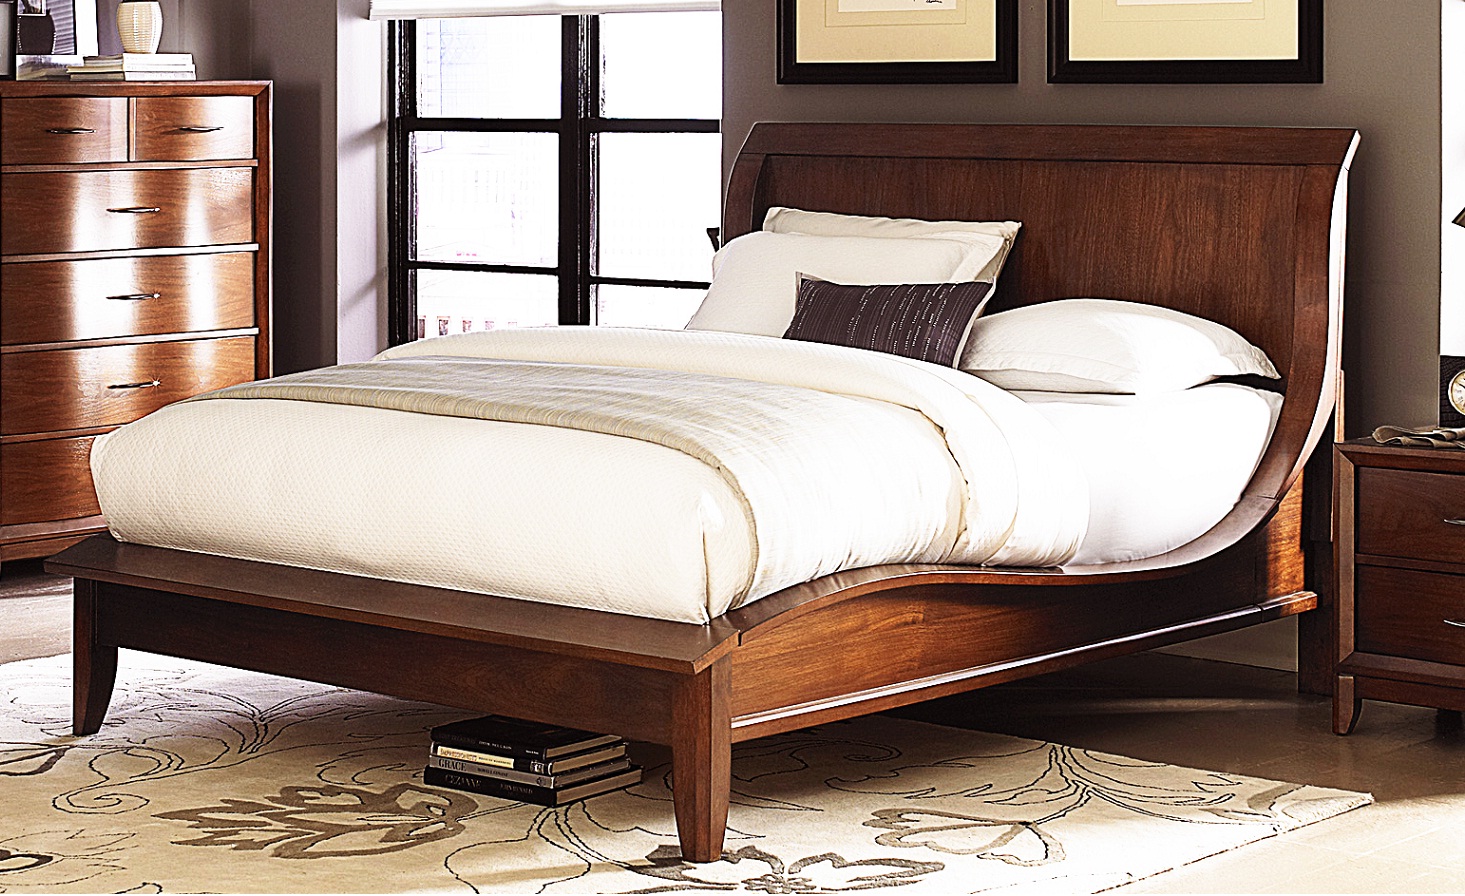 King Size Wood Bed Frame.Image Of Queen Size Sleigh Bed Frame. Trendy